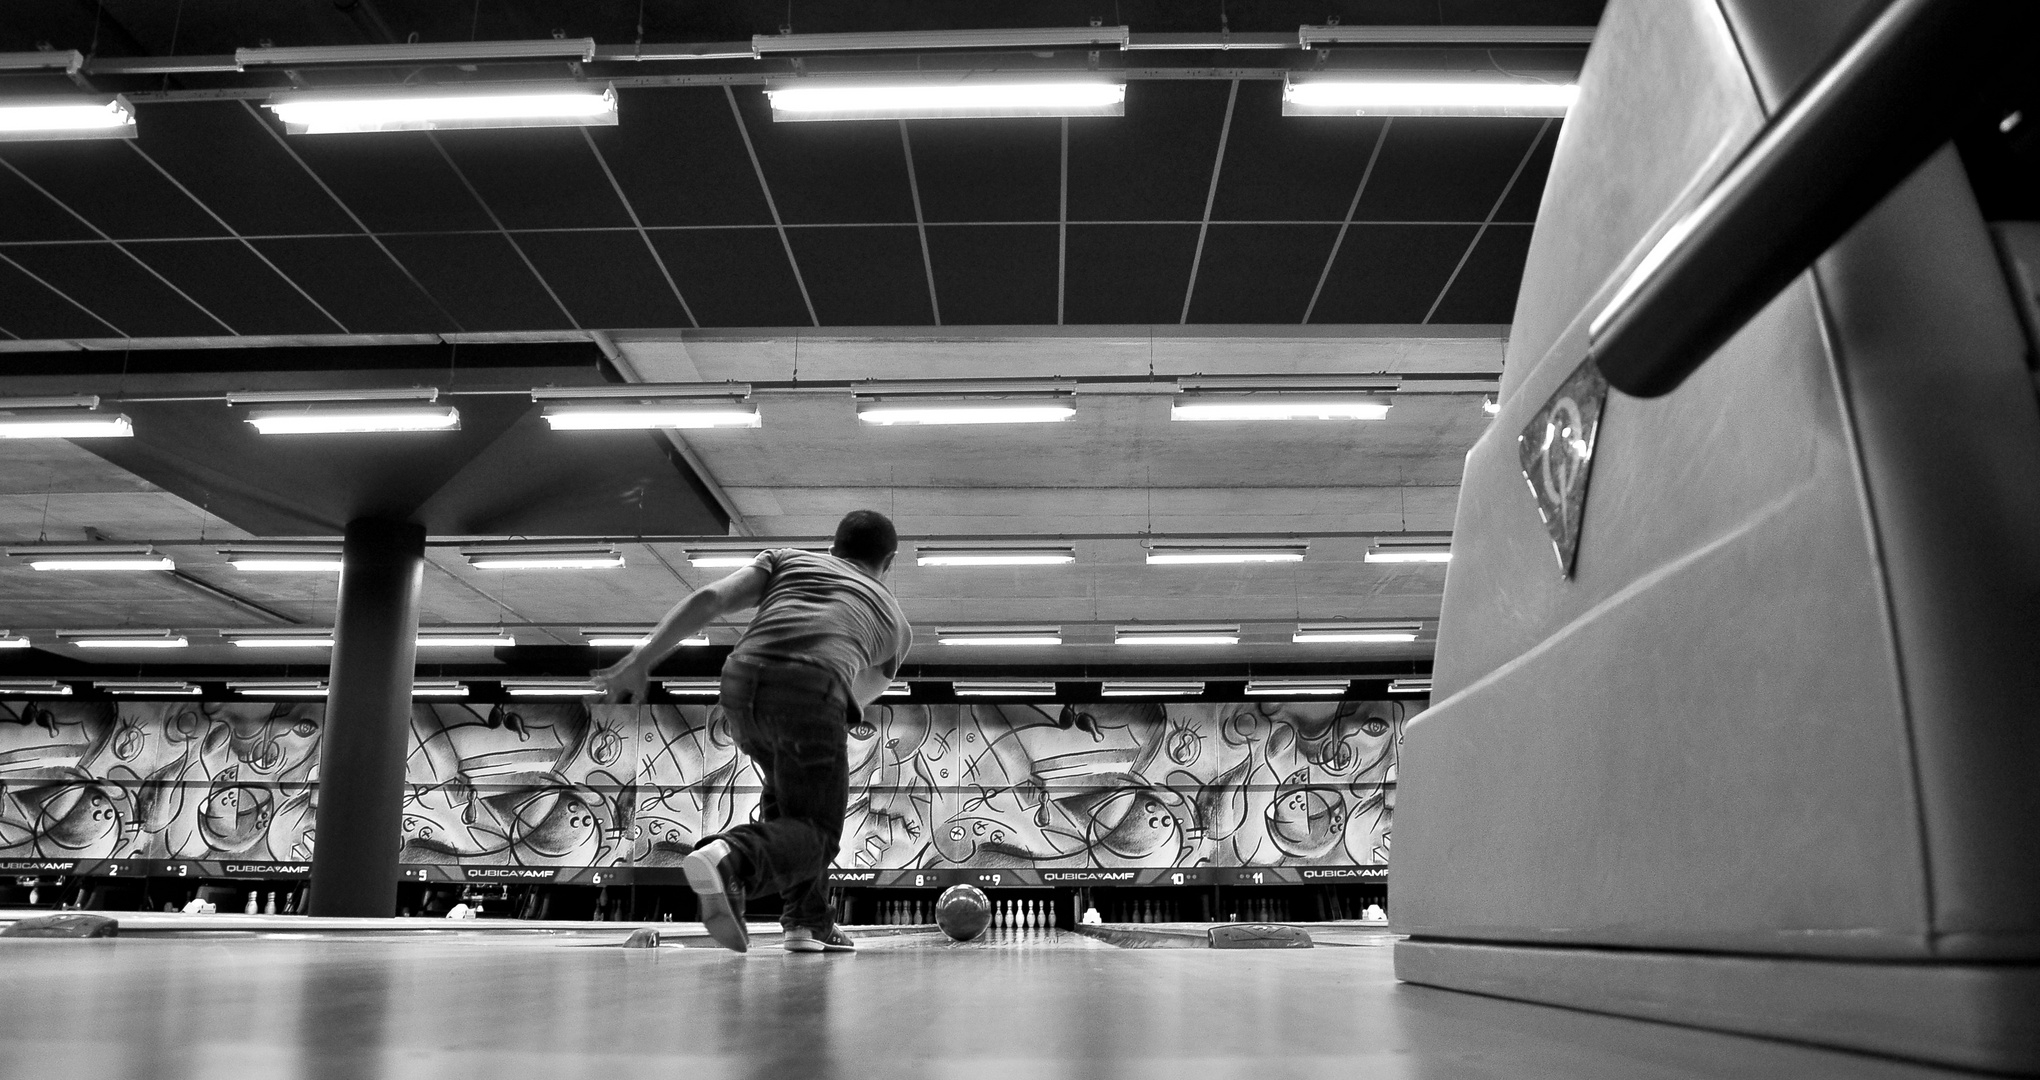 The bowling